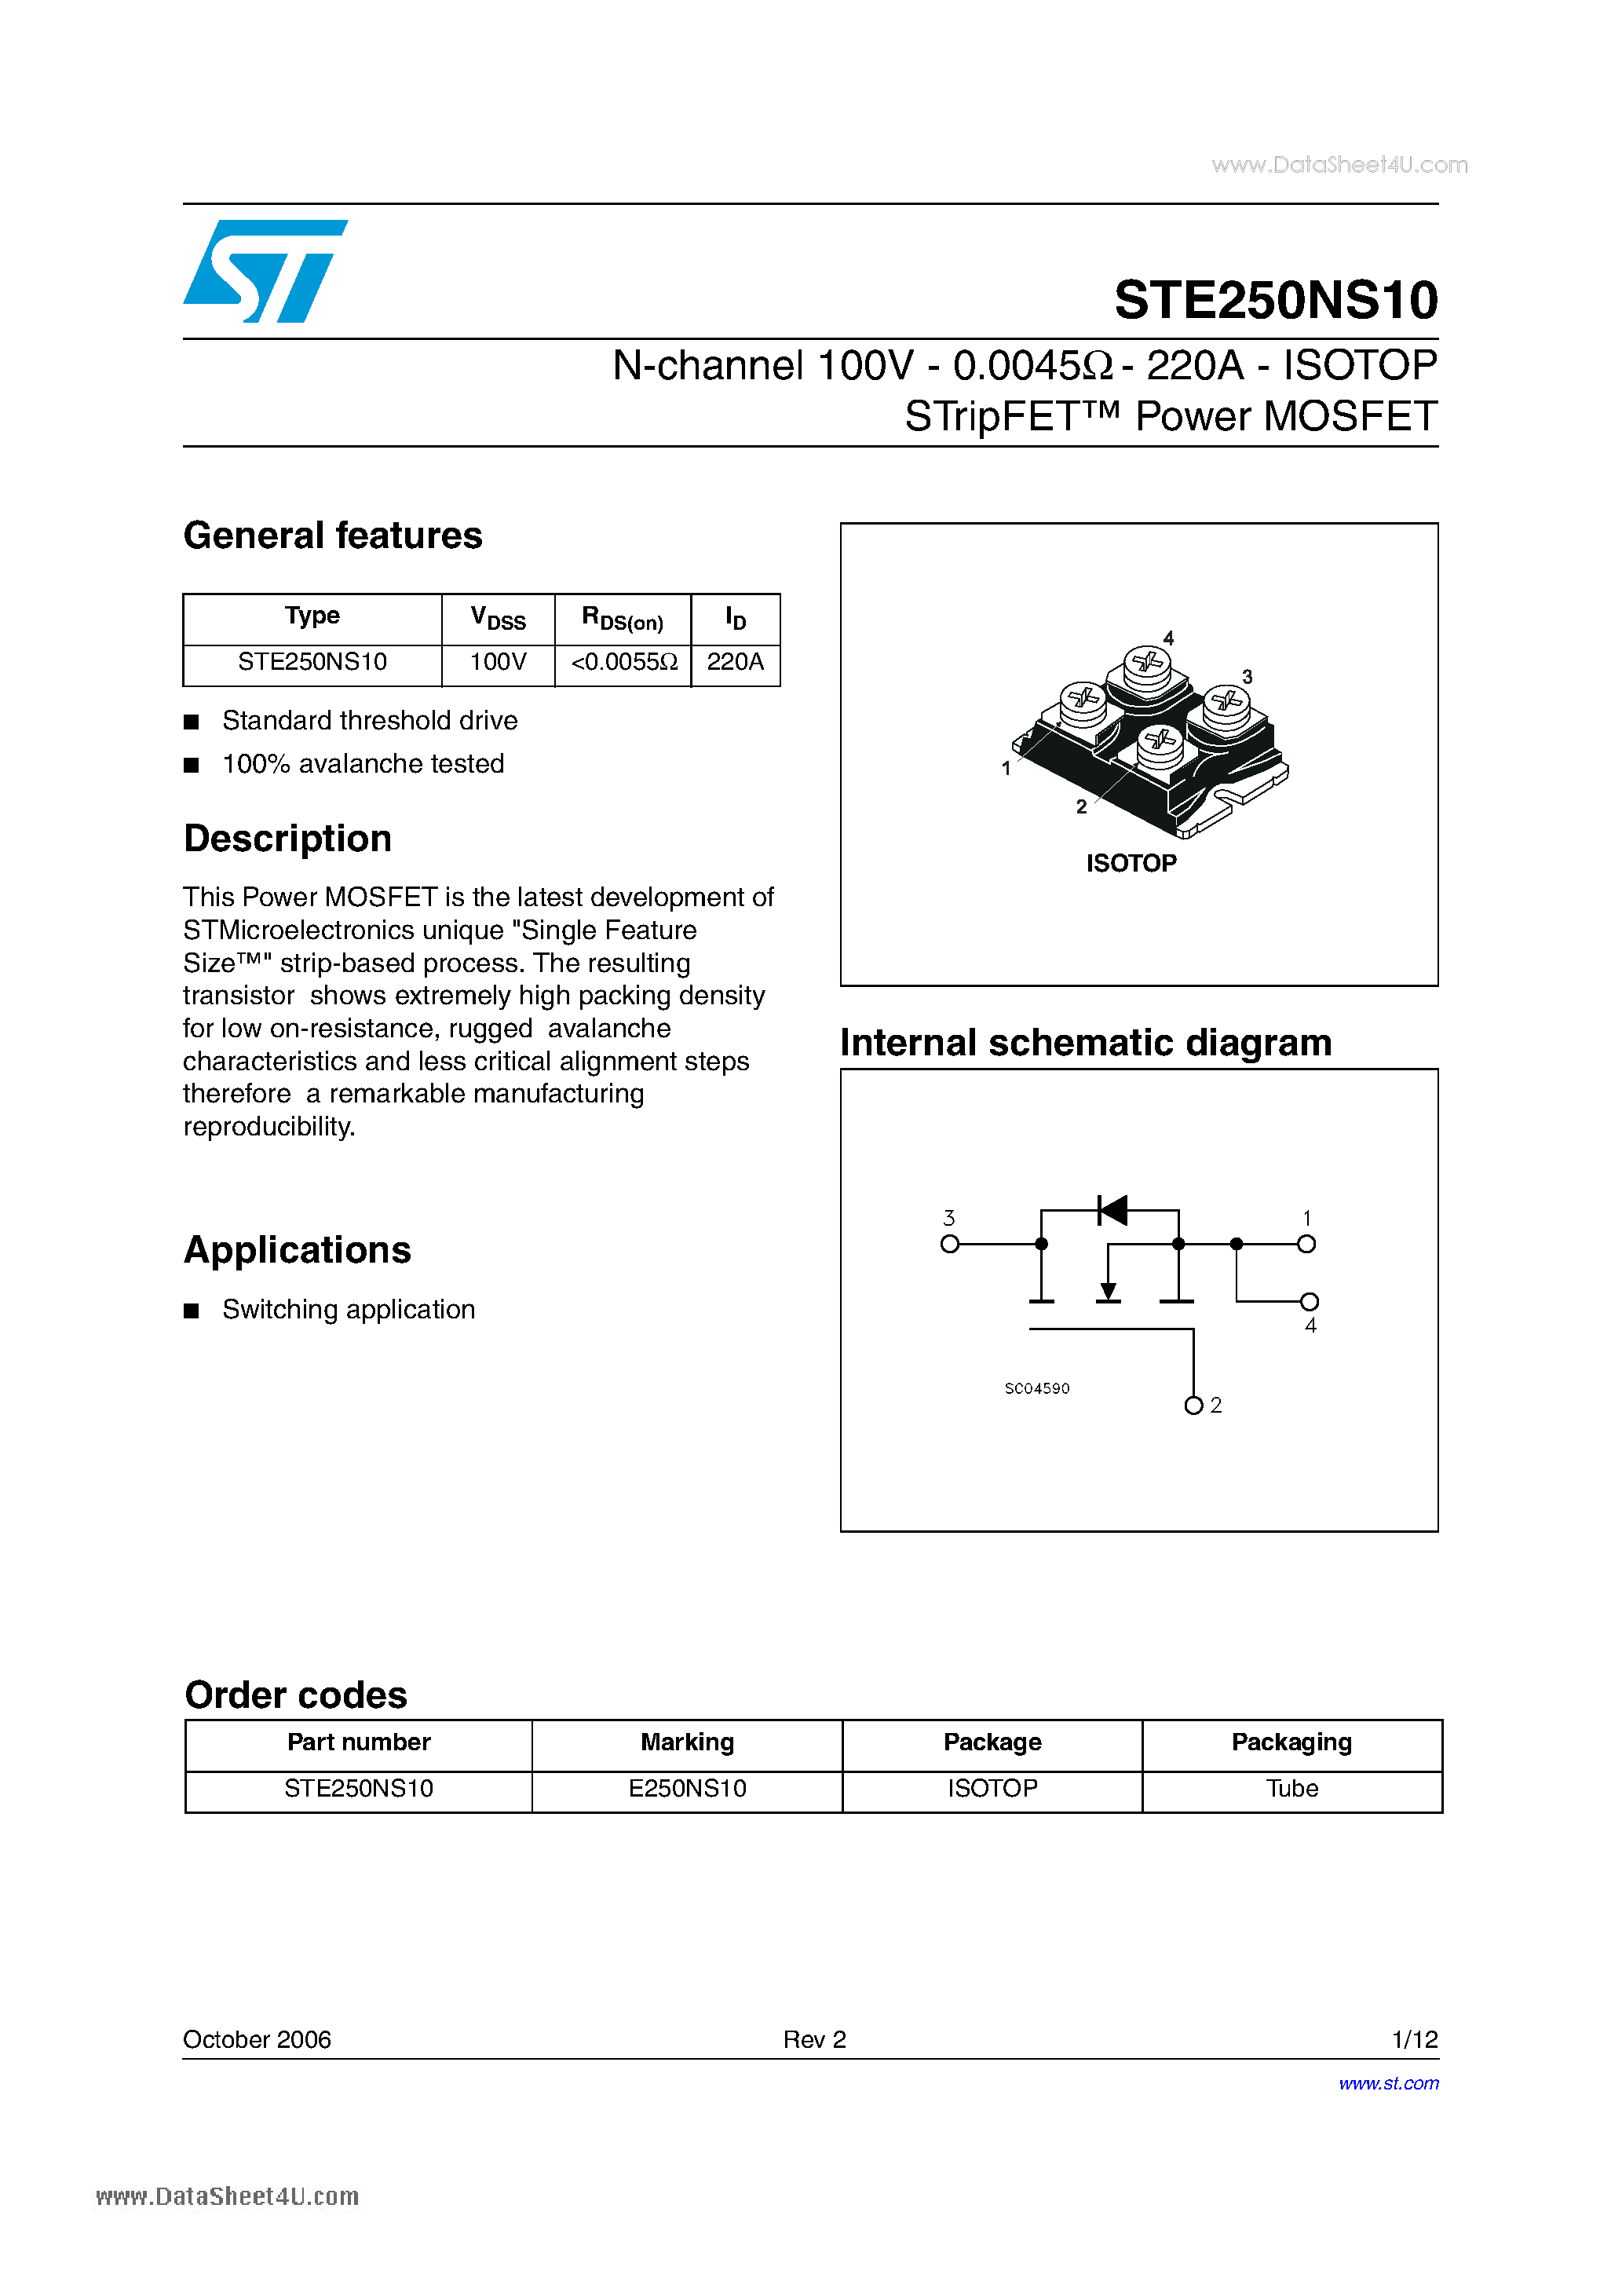 Даташит STE250NS10 - ISOTOP STripFET Power MOSFET страница 1